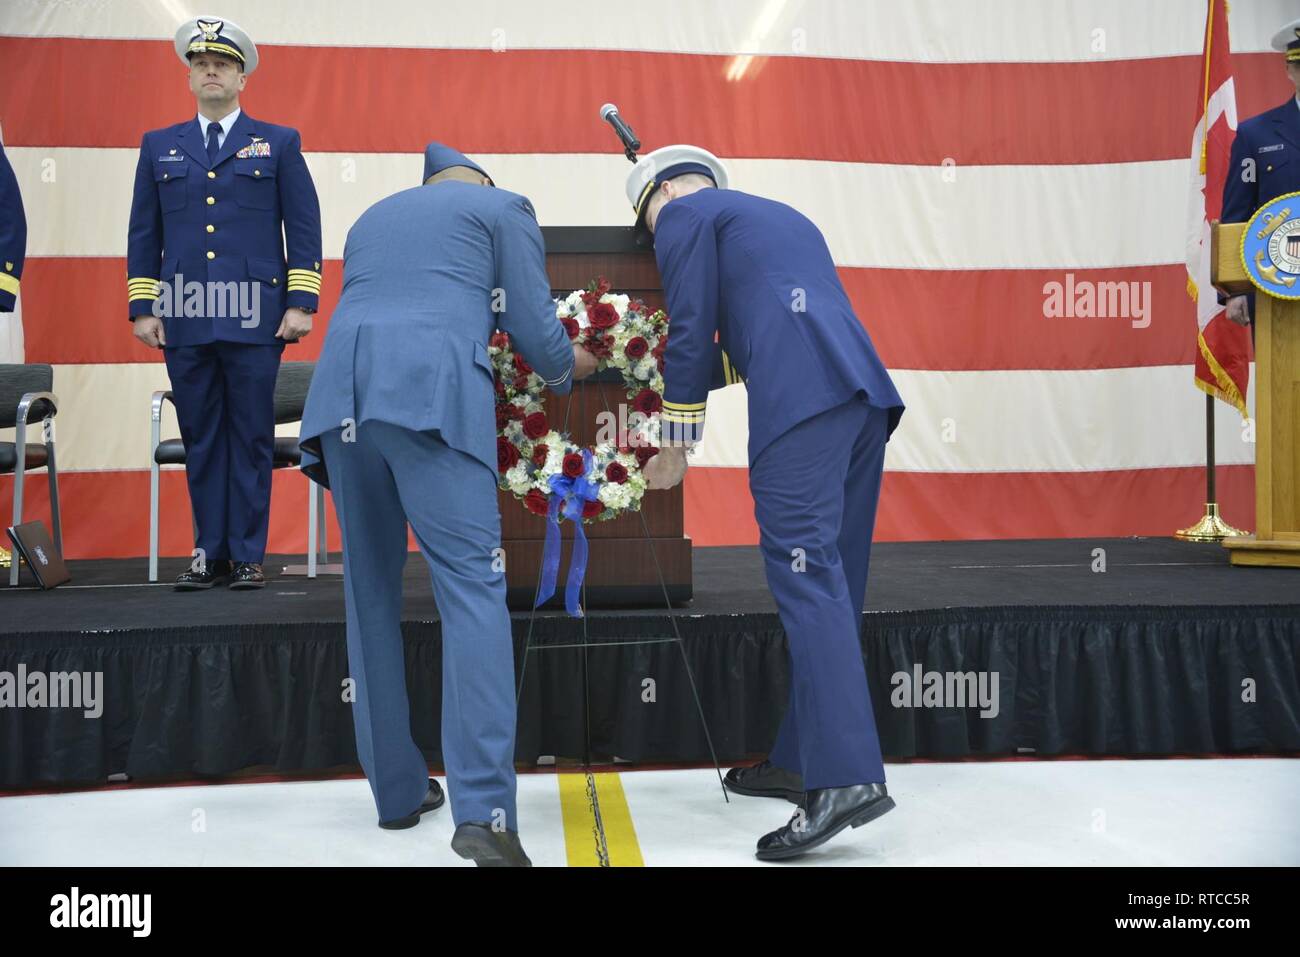 U.S. Coast Guard Lt. Cmdr. John Filipowicz and Royal Canadian Air Force Capt. Pete Wright present the wreath marking the 40th anniversary four aircrew members of Aircraft 1432 gave the ultimate sacrifice, Wednesday, Feb. 13, 2019, Cape Cod, Massachusetts. Both pilots, one crewmember, and a corpsman lost their lives in the accident, while the flight mechanic survived and was rescued by the fishing vessel. Stock Photo